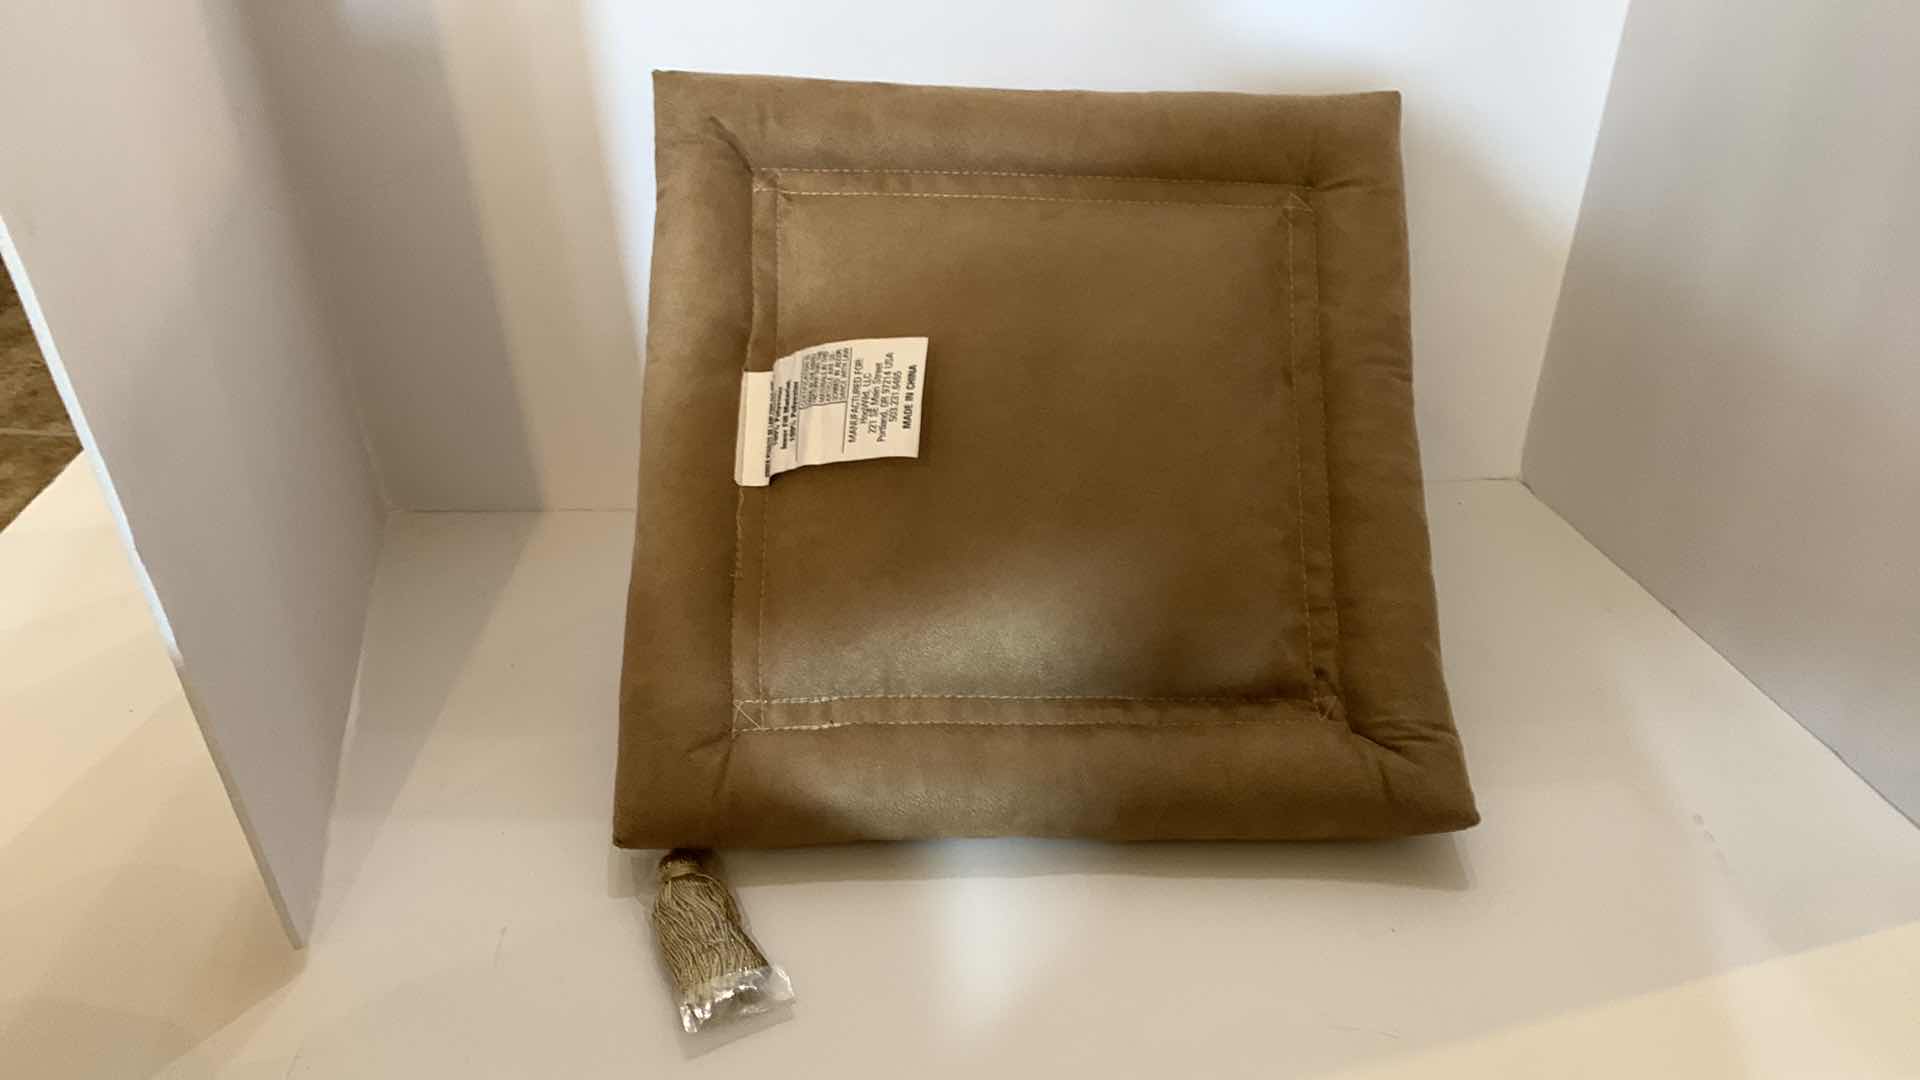 Photo 4 of SOFT PILLOWY LAPTOP HOLDER FOR PHONE / KINDLE / IPAD